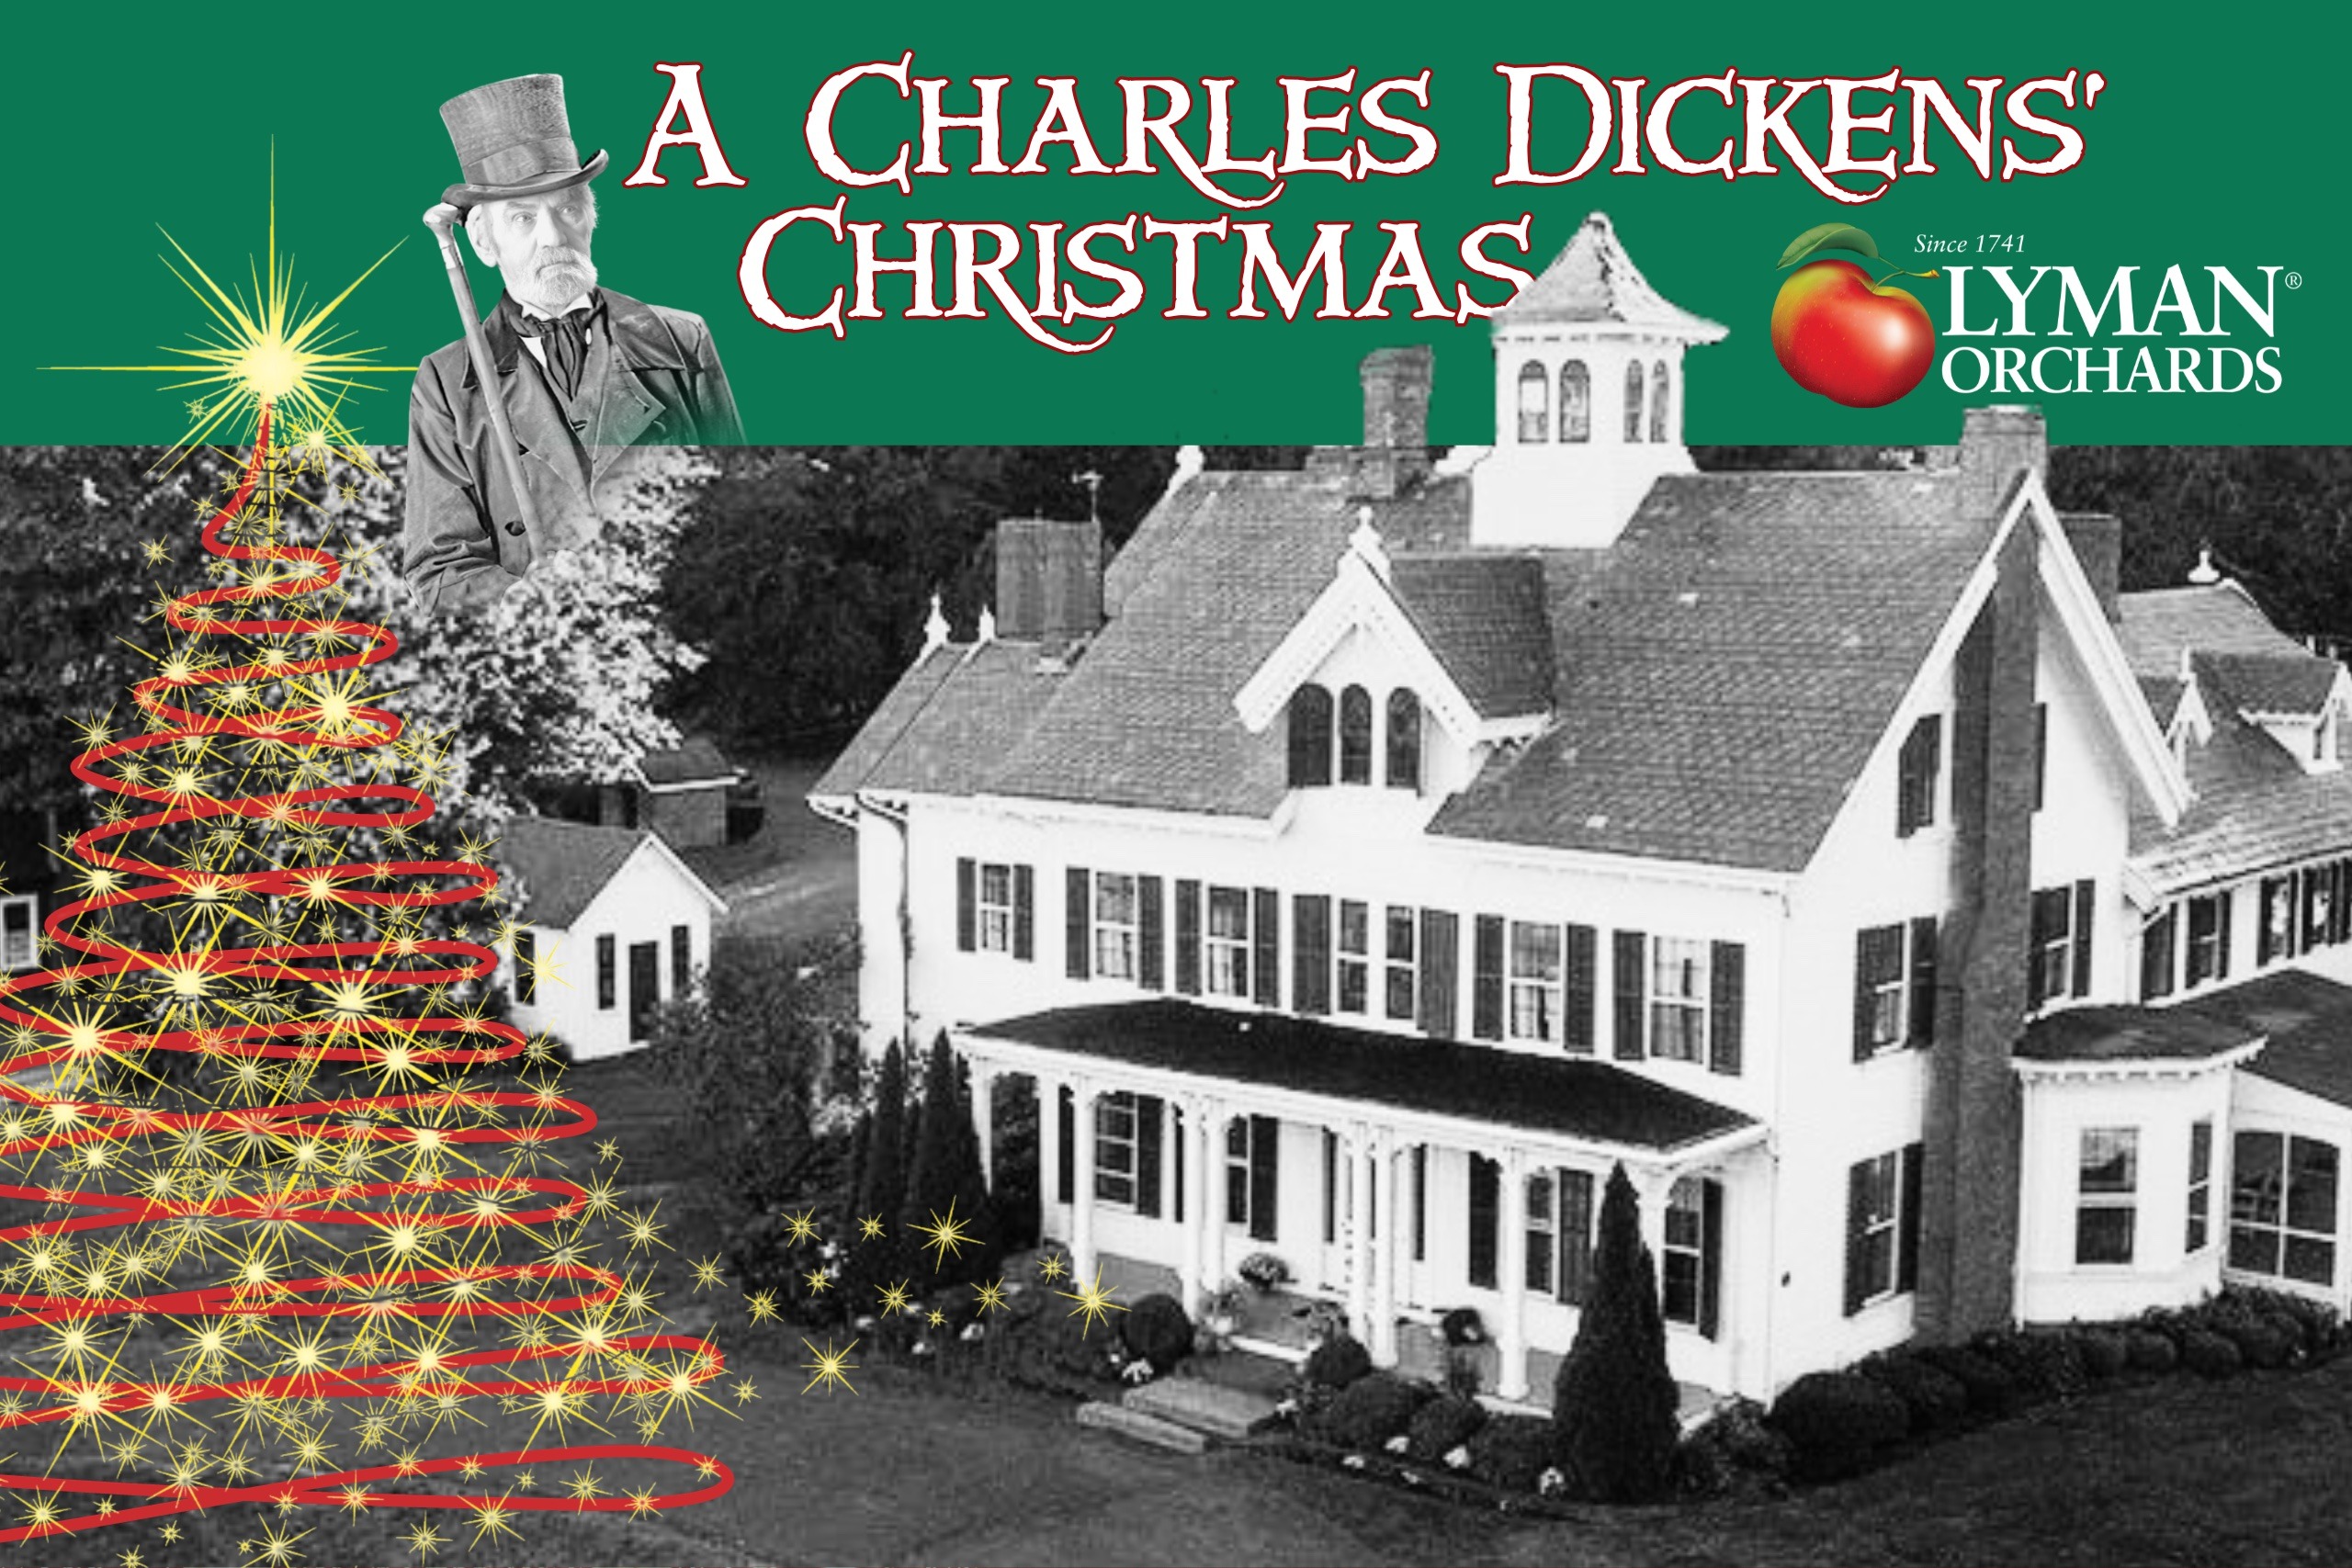 A Charles Dickens' Christmas at Lyman Orchards